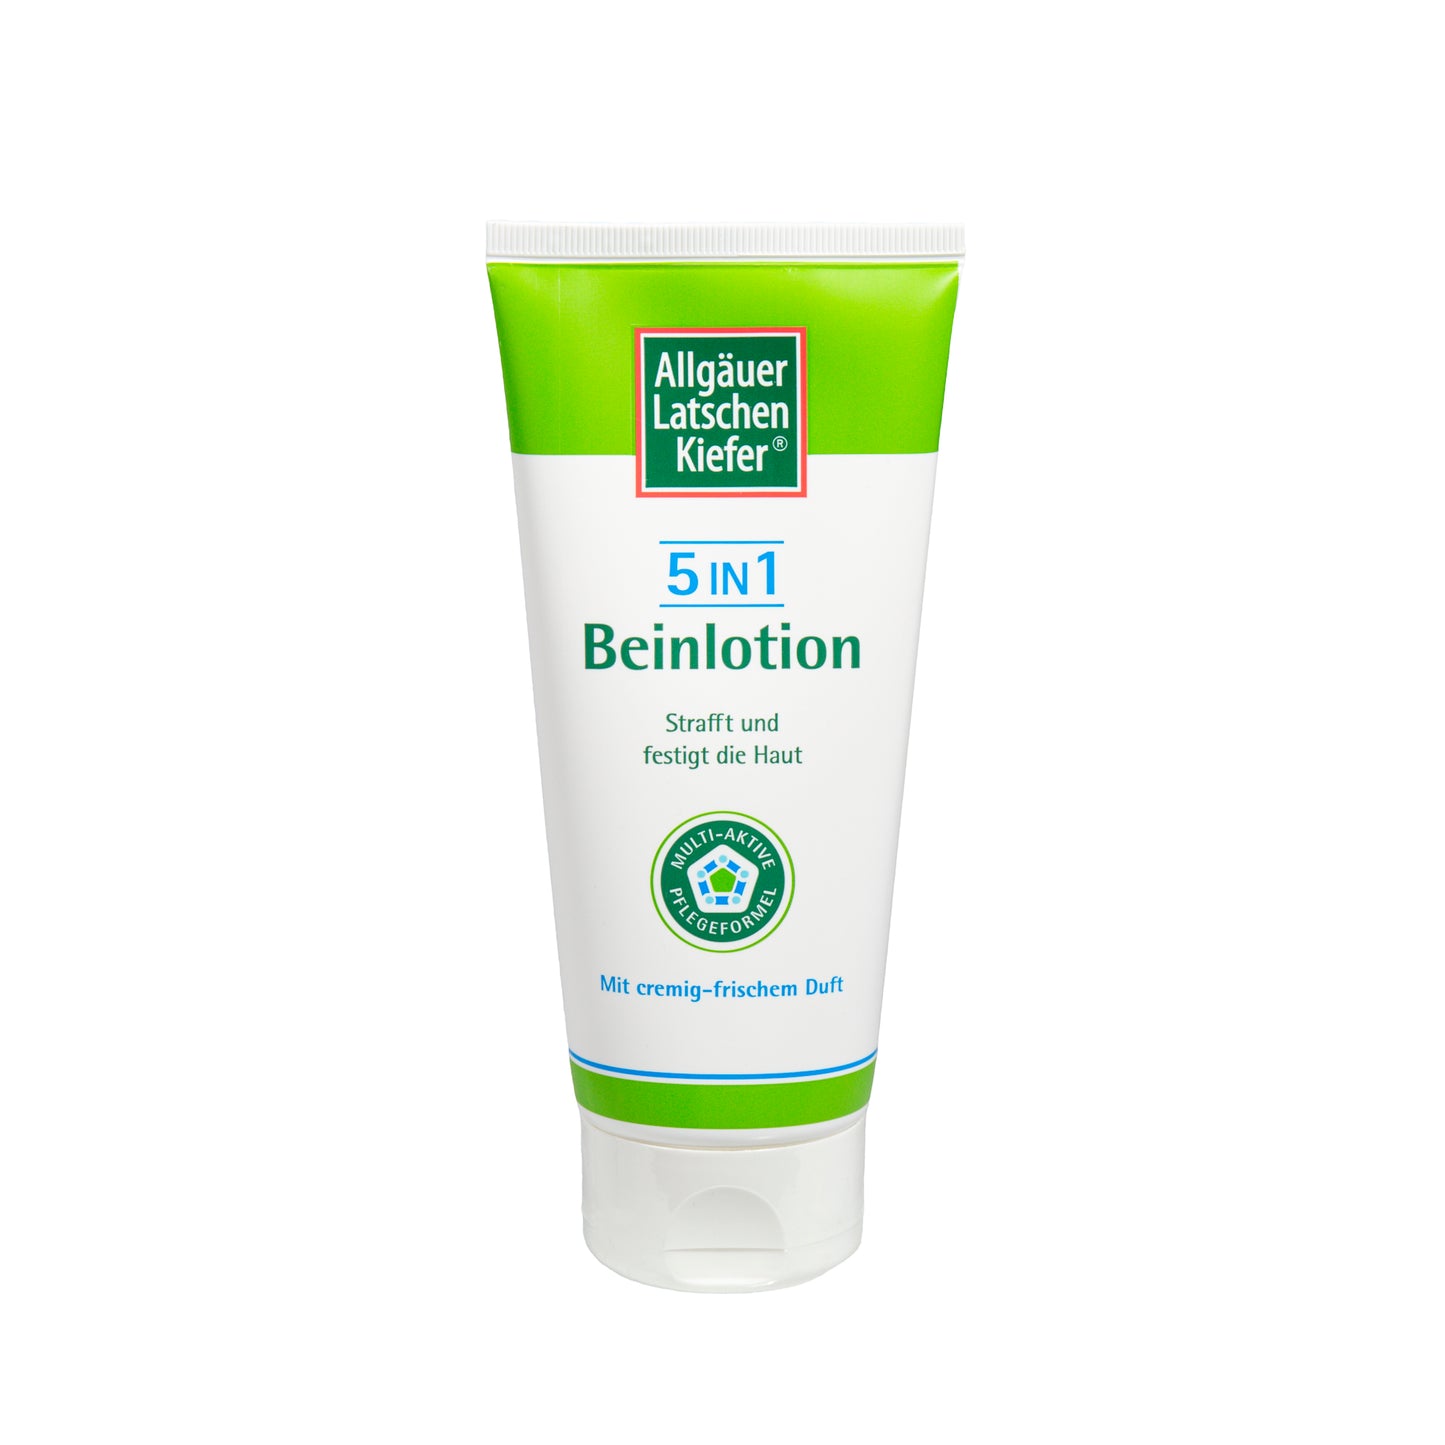 Primary Image of 5 in 1 Beinlotion